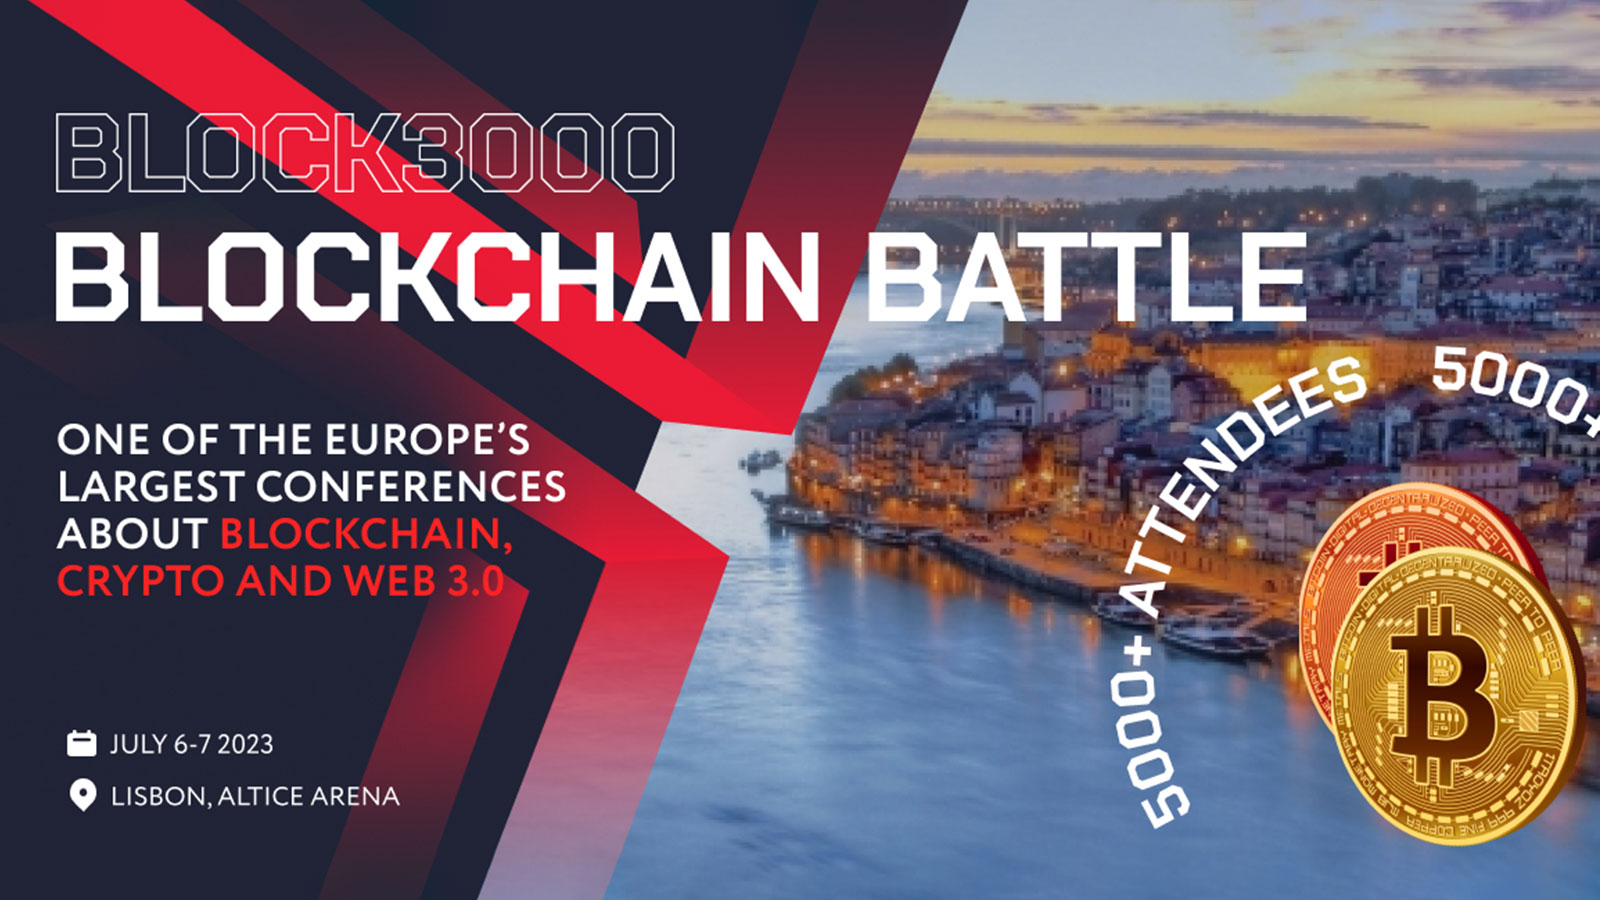 One of Europe’s Biggest Ever Crypto Events, Block 3000: Blockchain Battle Goes Live